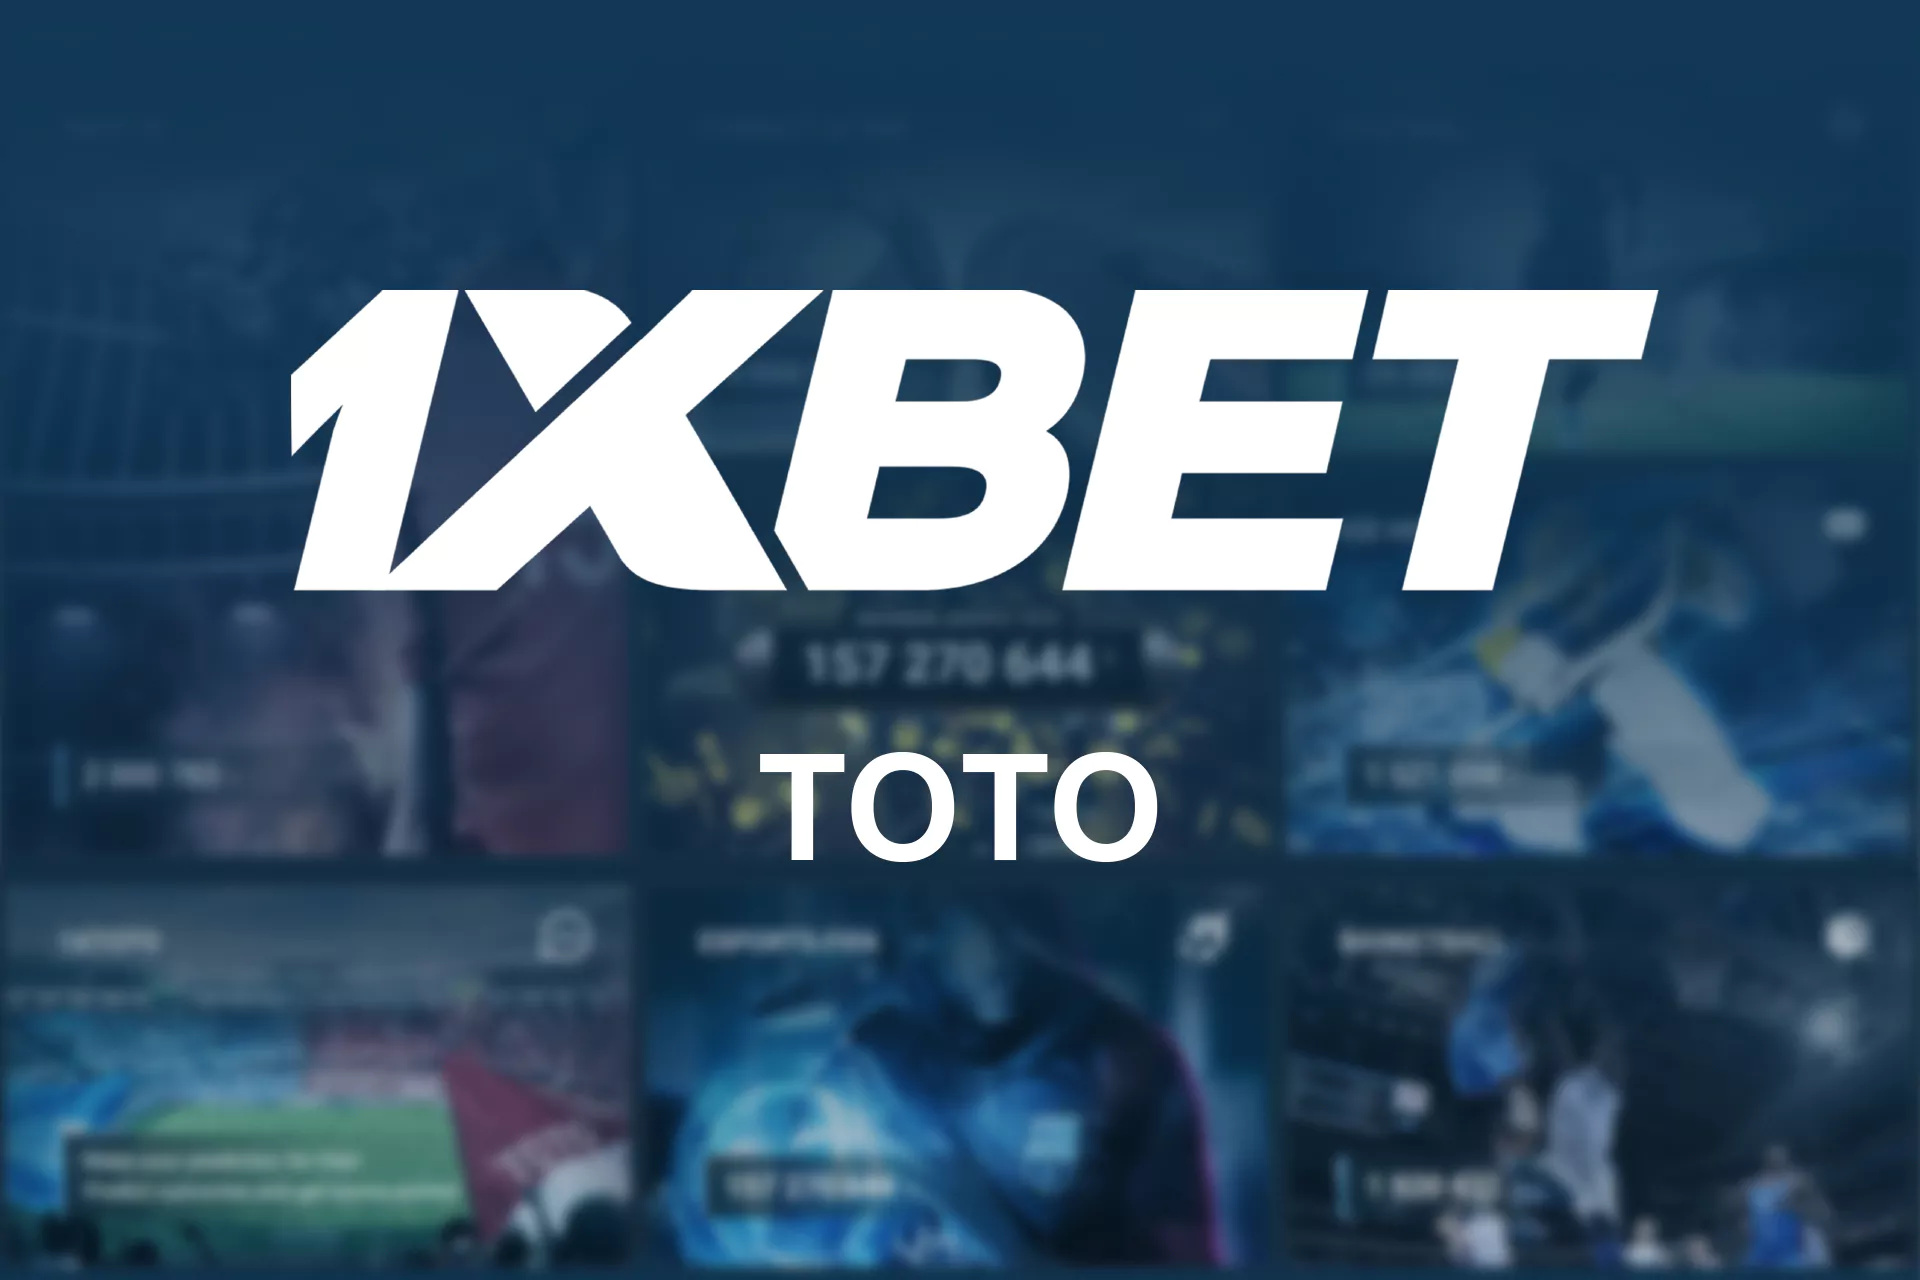 Play online TOTO on the official website 1xBet in BD.